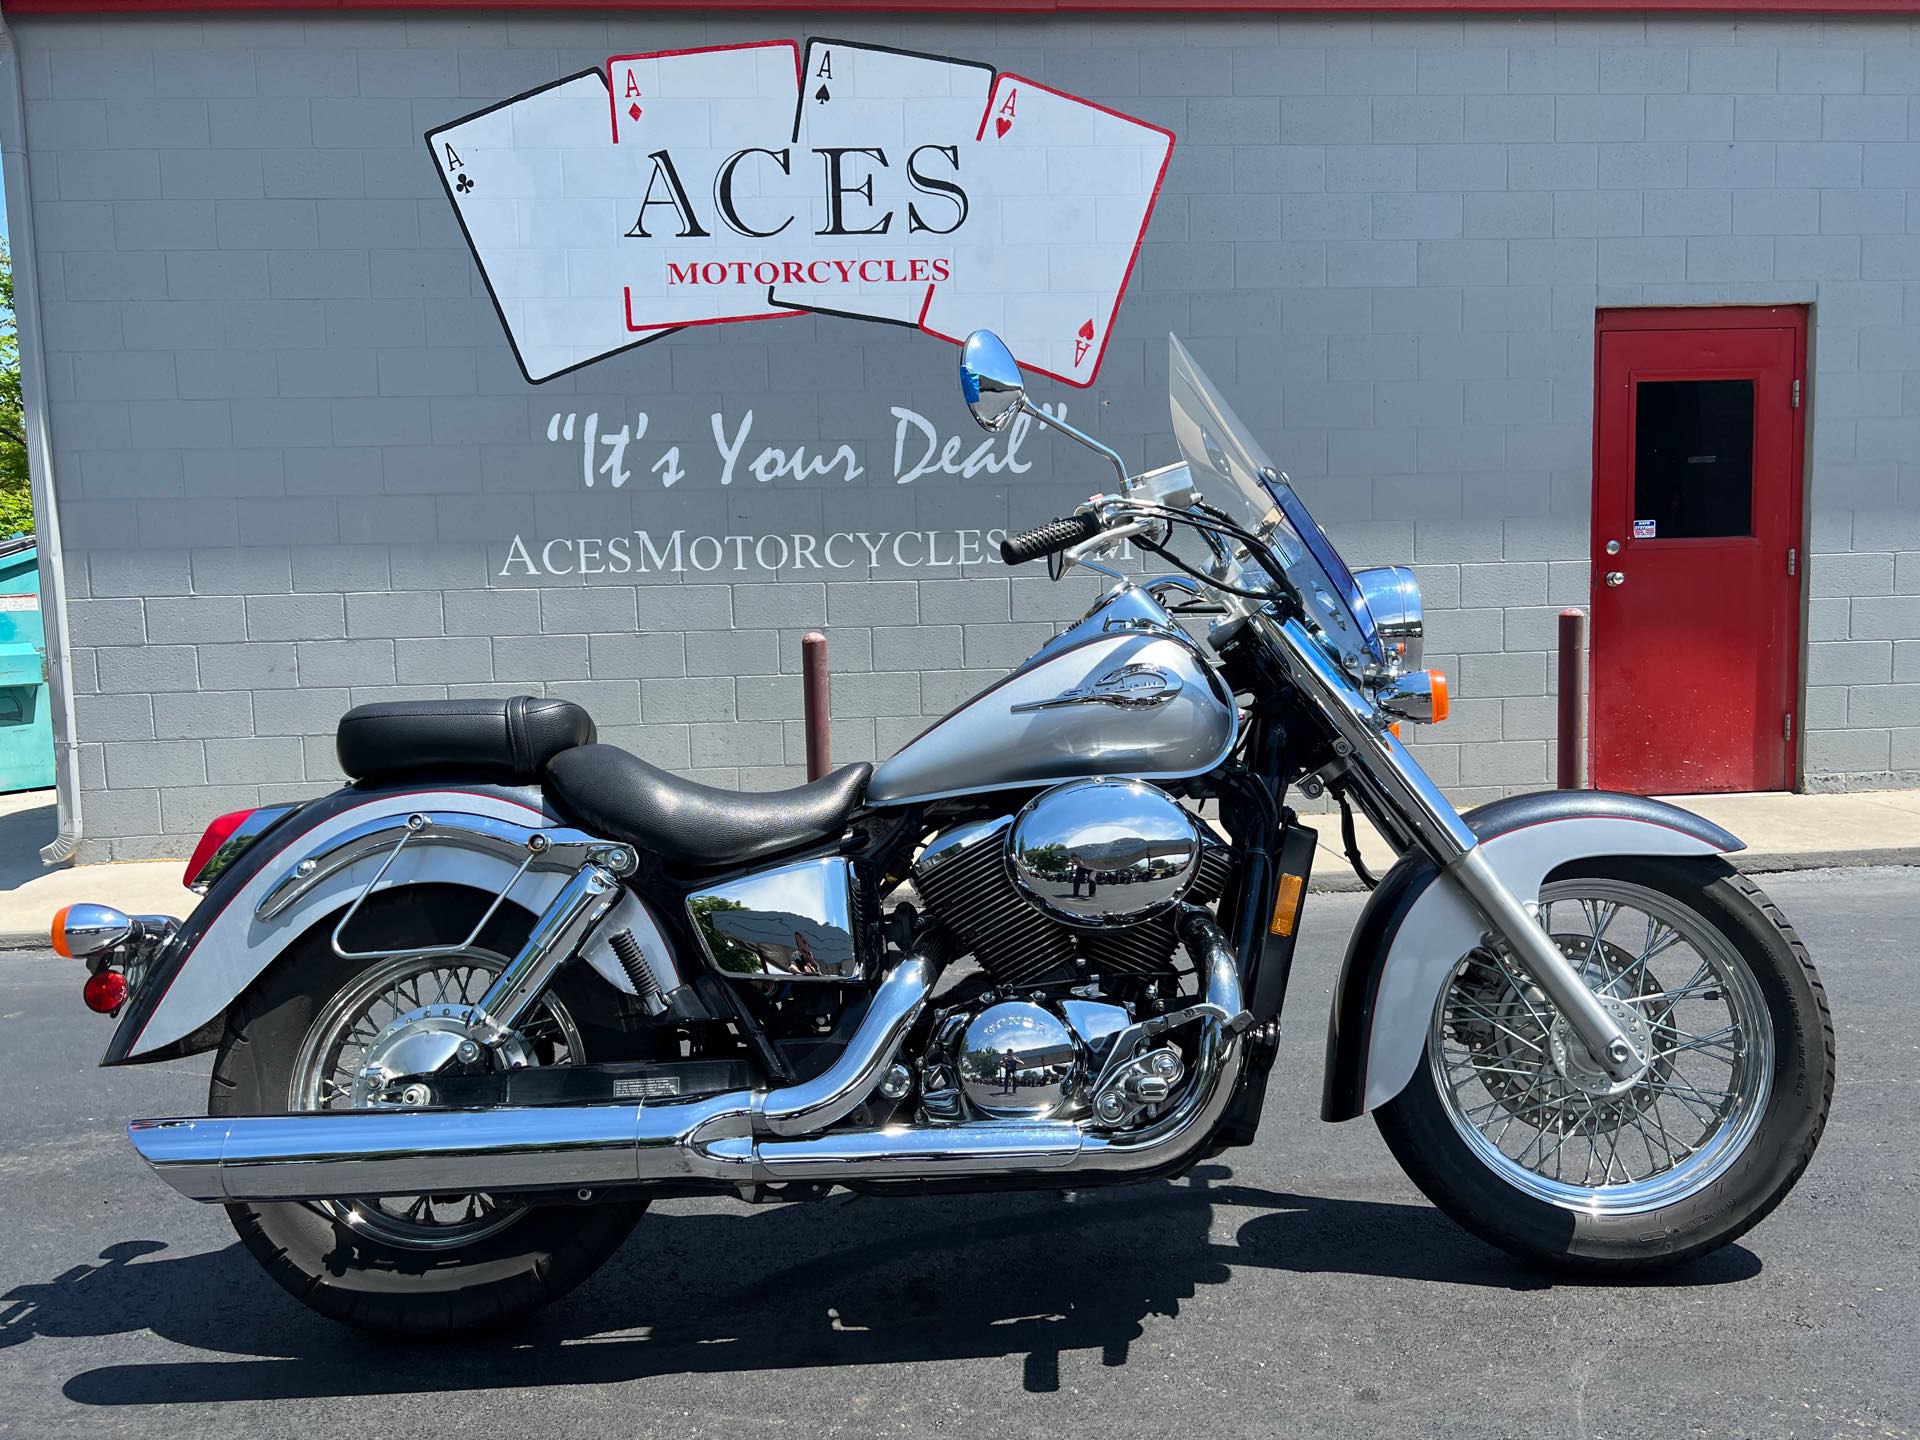 2003 HONDA VT750 at Aces Motorcycles - Fort Collins